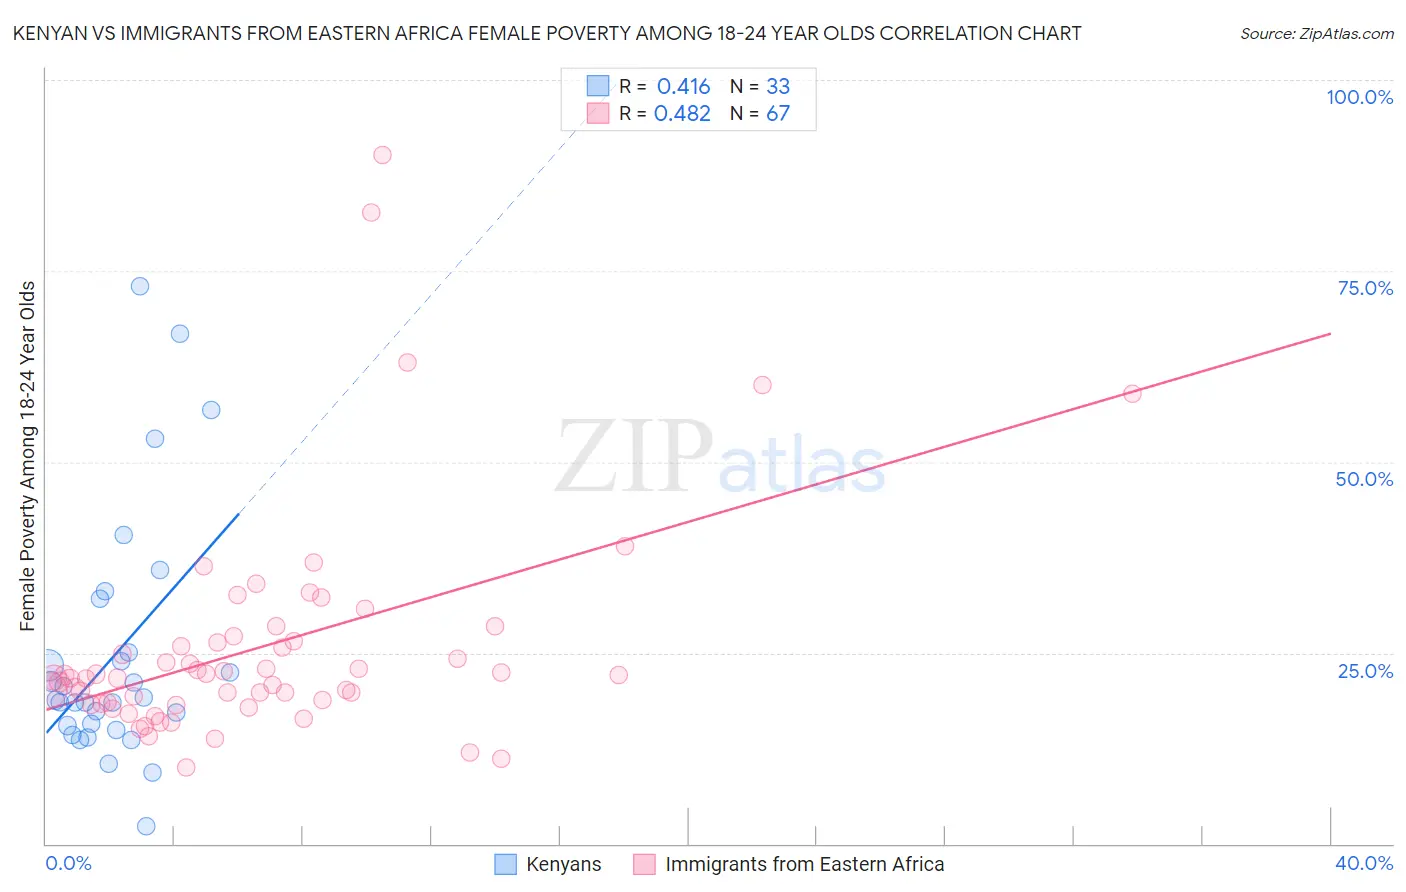 Kenyan vs Immigrants from Eastern Africa Female Poverty Among 18-24 Year Olds